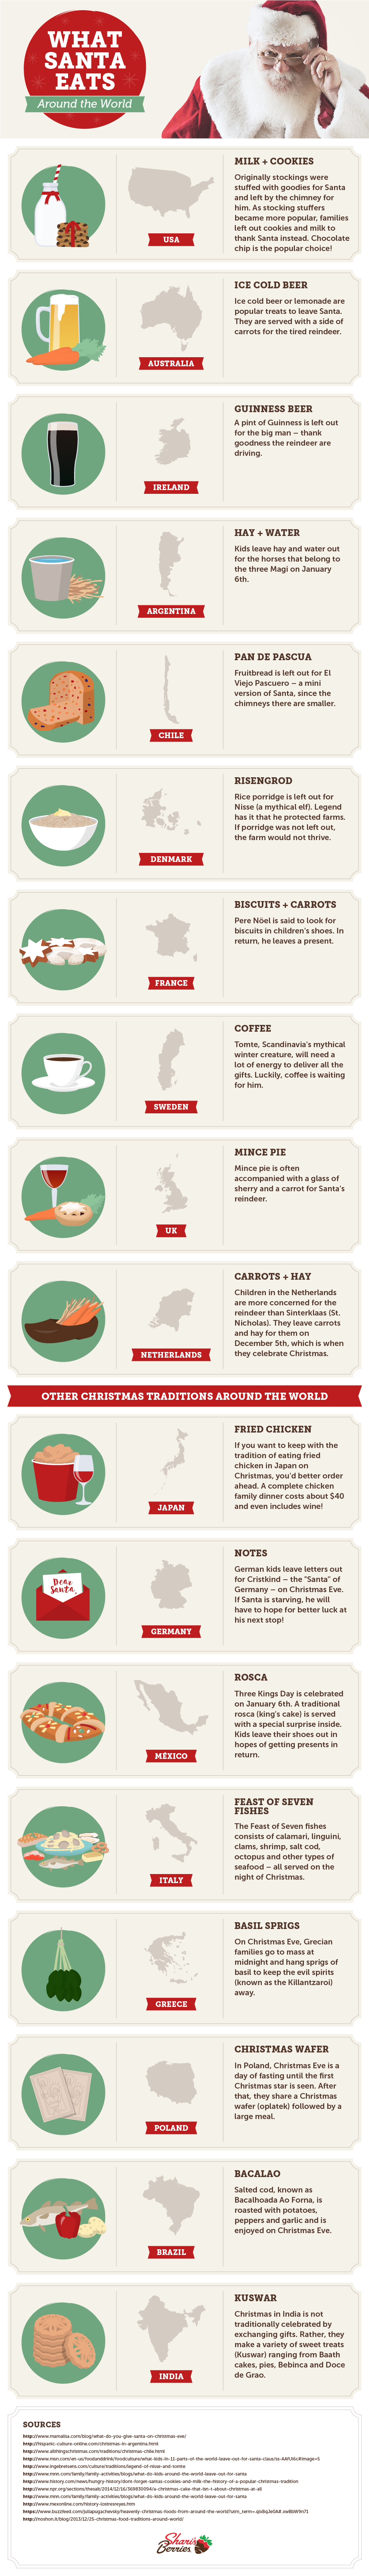 Infographic of what Santa Claus eats around the world on Christmas Eve.